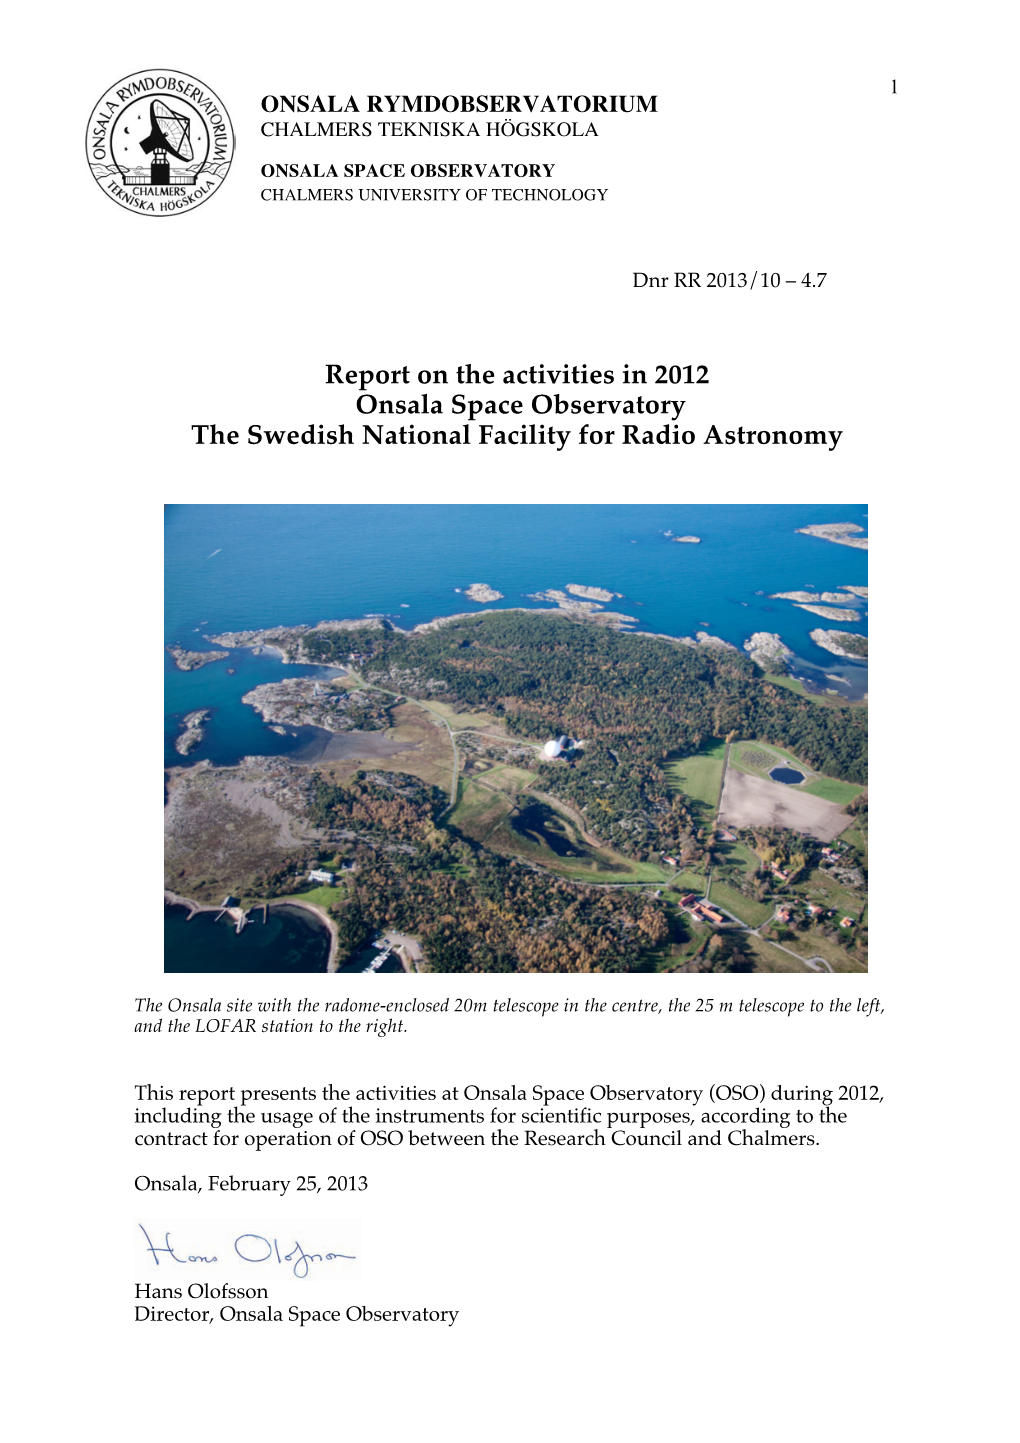 Report on the Activities in 2012 Onsala Space Observatory the Swedish National Facility for Radio Astronomy